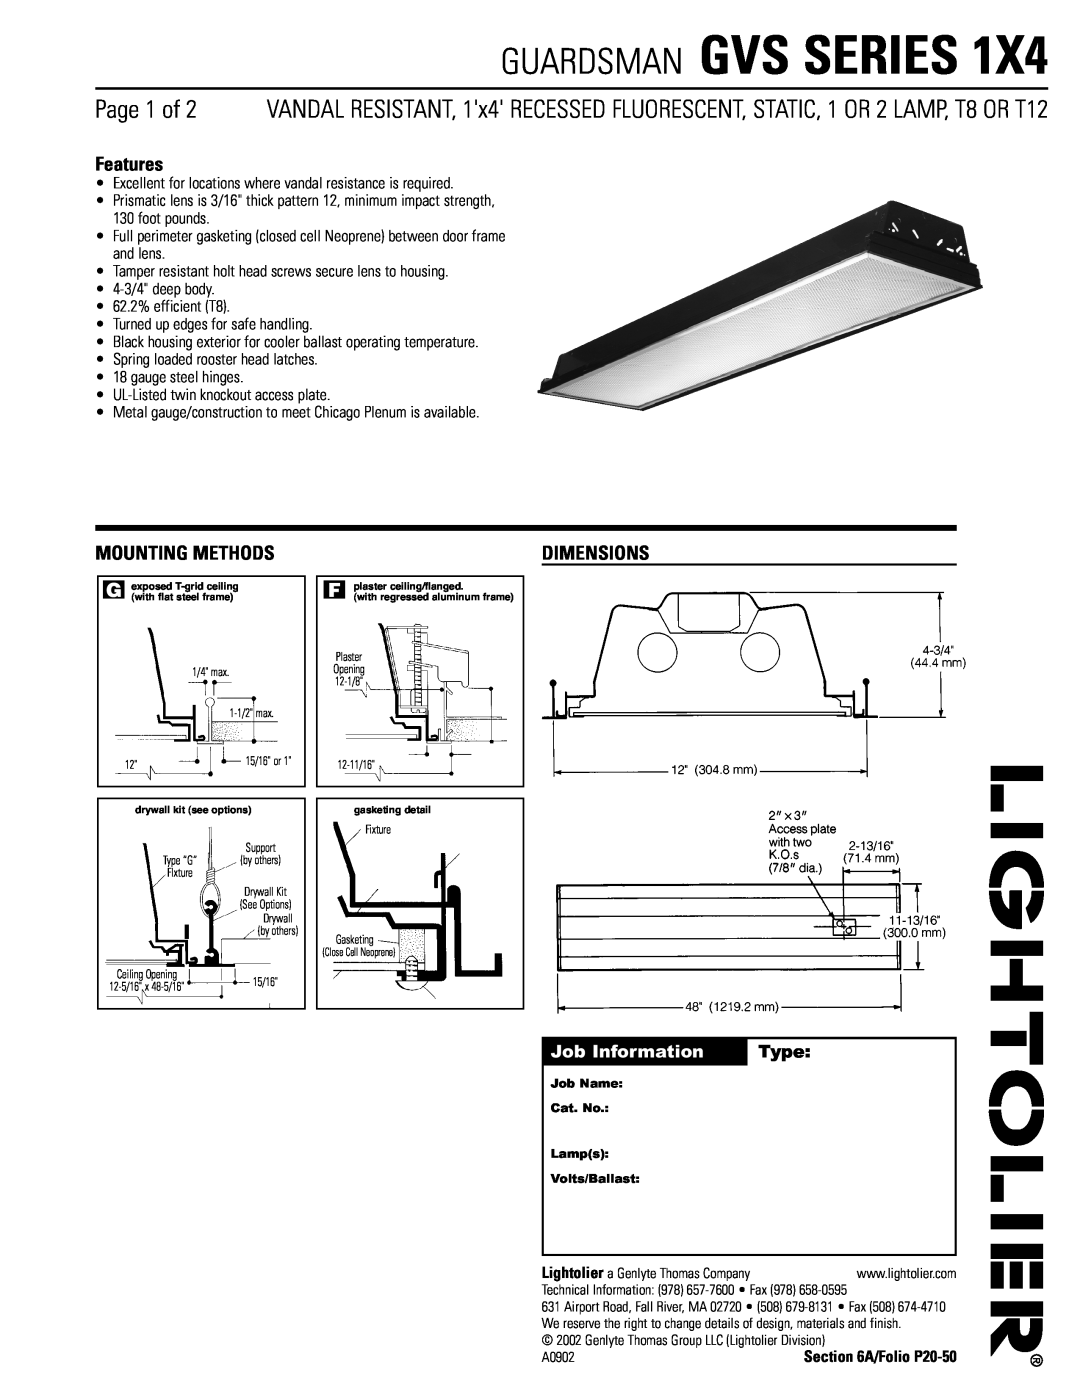 Lightolier GVS SERIES 1X4 dimensions Features, Mounting Methods, Dimensions, Job Information, Type, Guardsman Gvs Series 